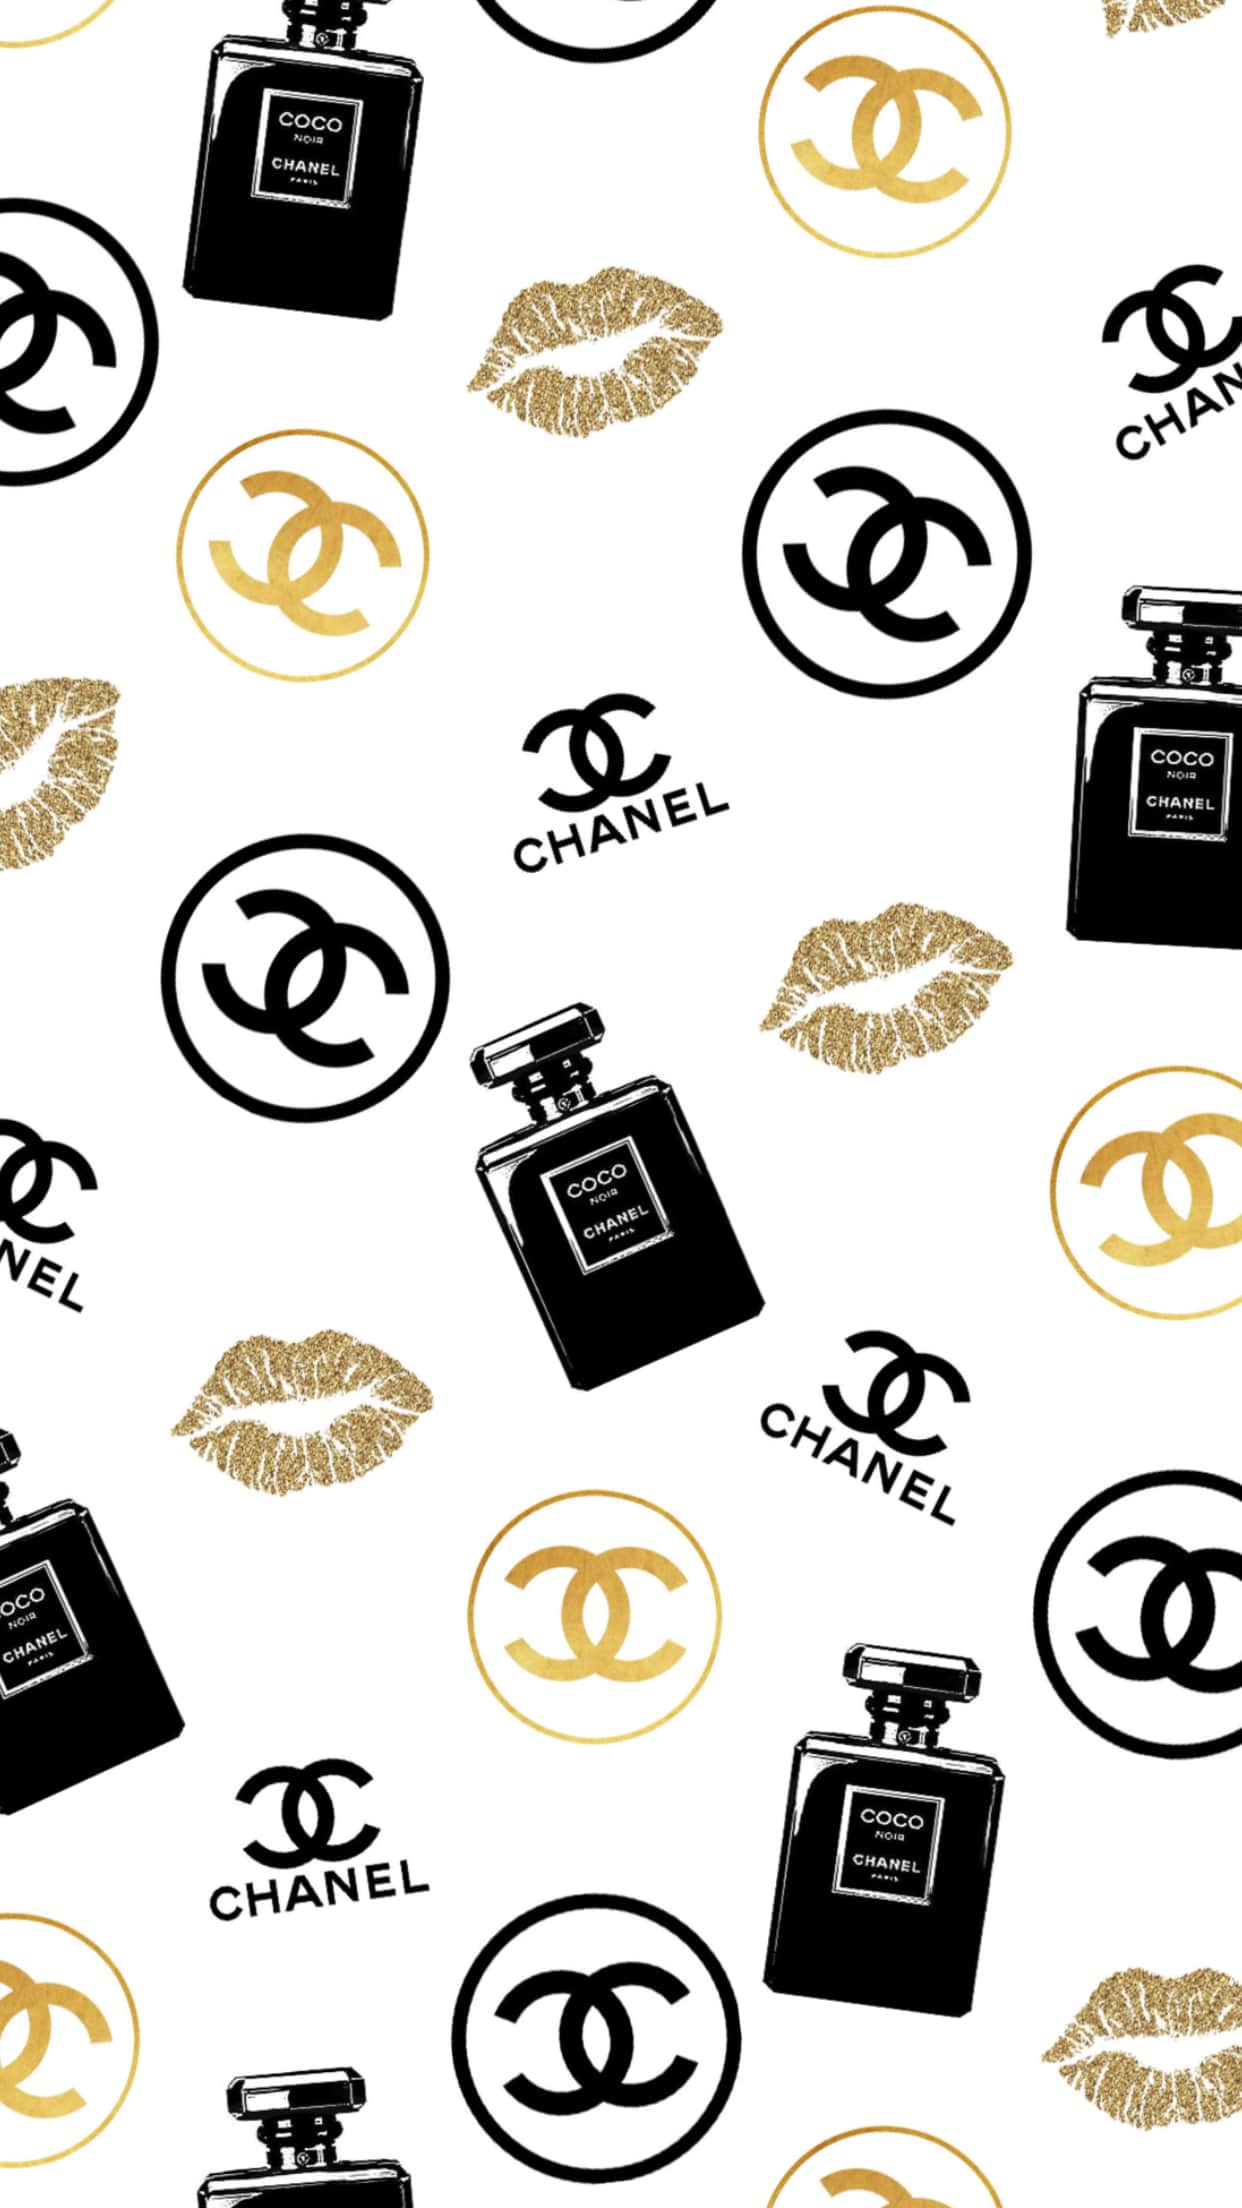 Iphone Chanel Wallpaper Kolpaper Awesome Free Hd Wallpapers